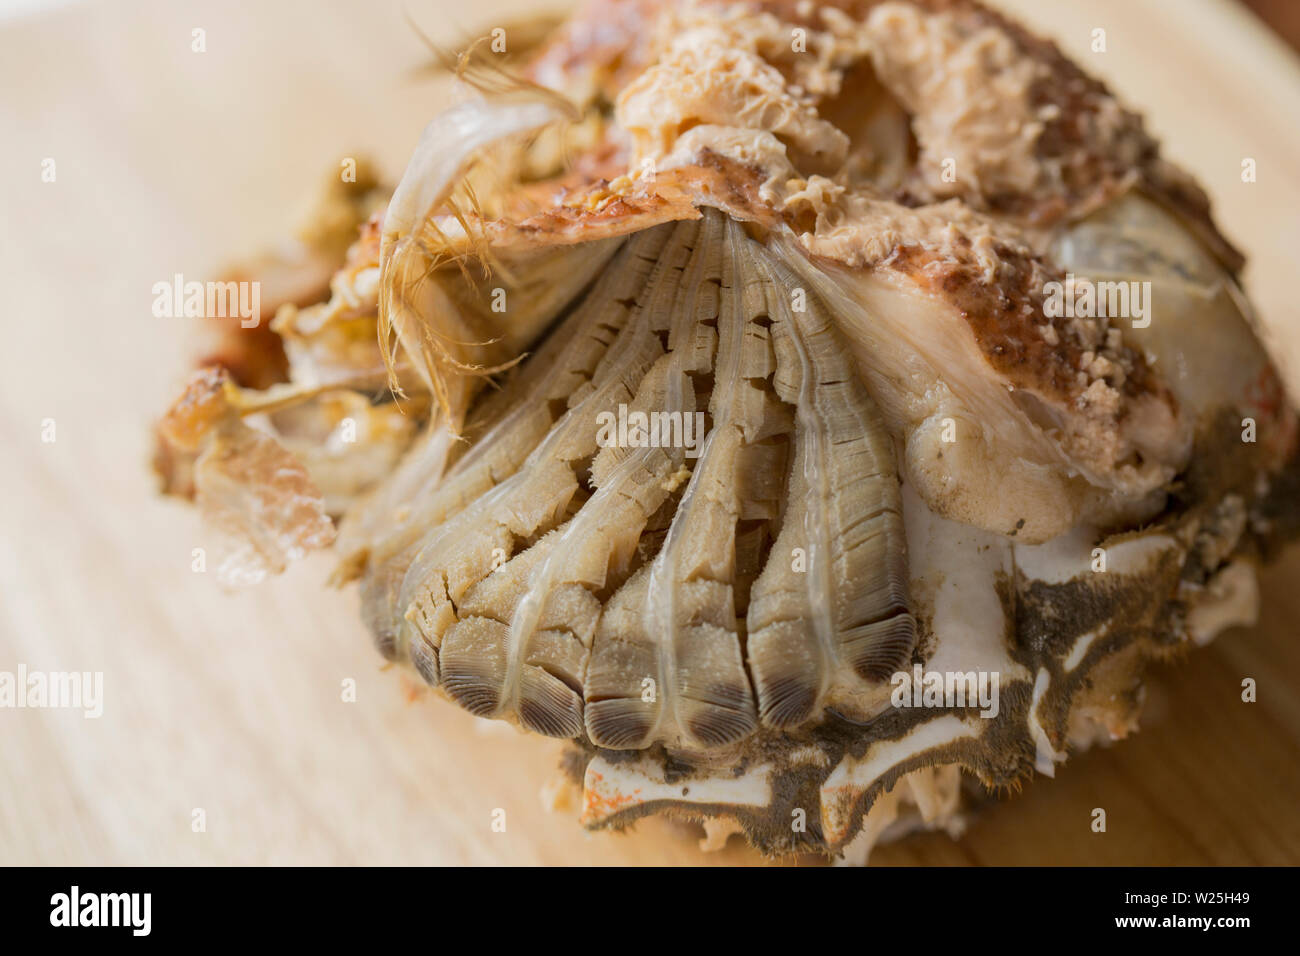 The body of a boiled spider crab, Maja brachydactyla, that was caught in the English Channel. It has been boiled and the shell and legs removed. The p Stock Photo